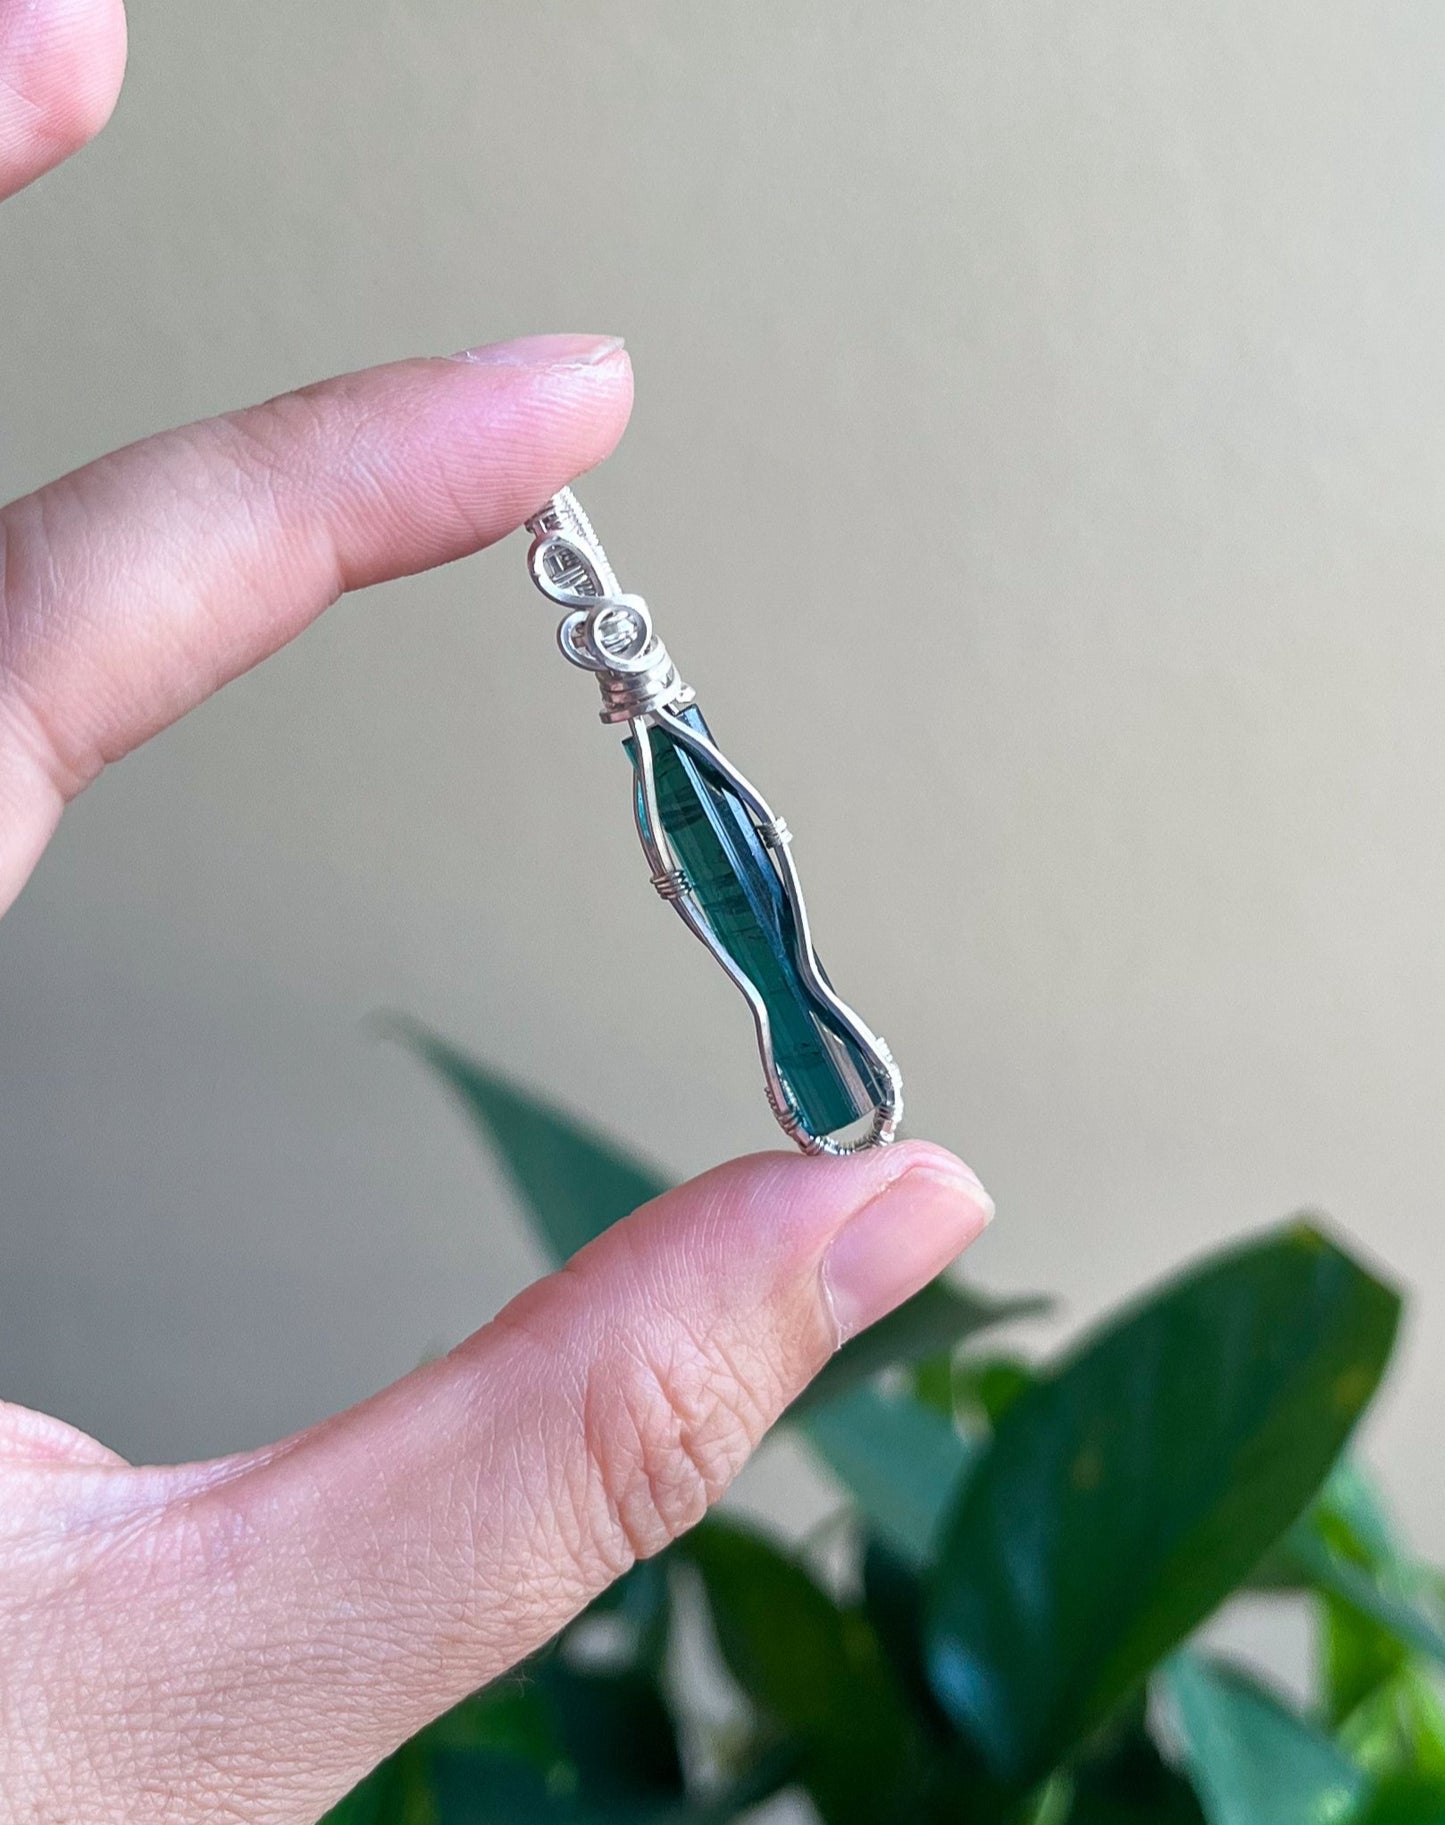 Inidicolite Green-Blue Tourmaline Silver Pendant, wire wrapped jewelry, handmade gift